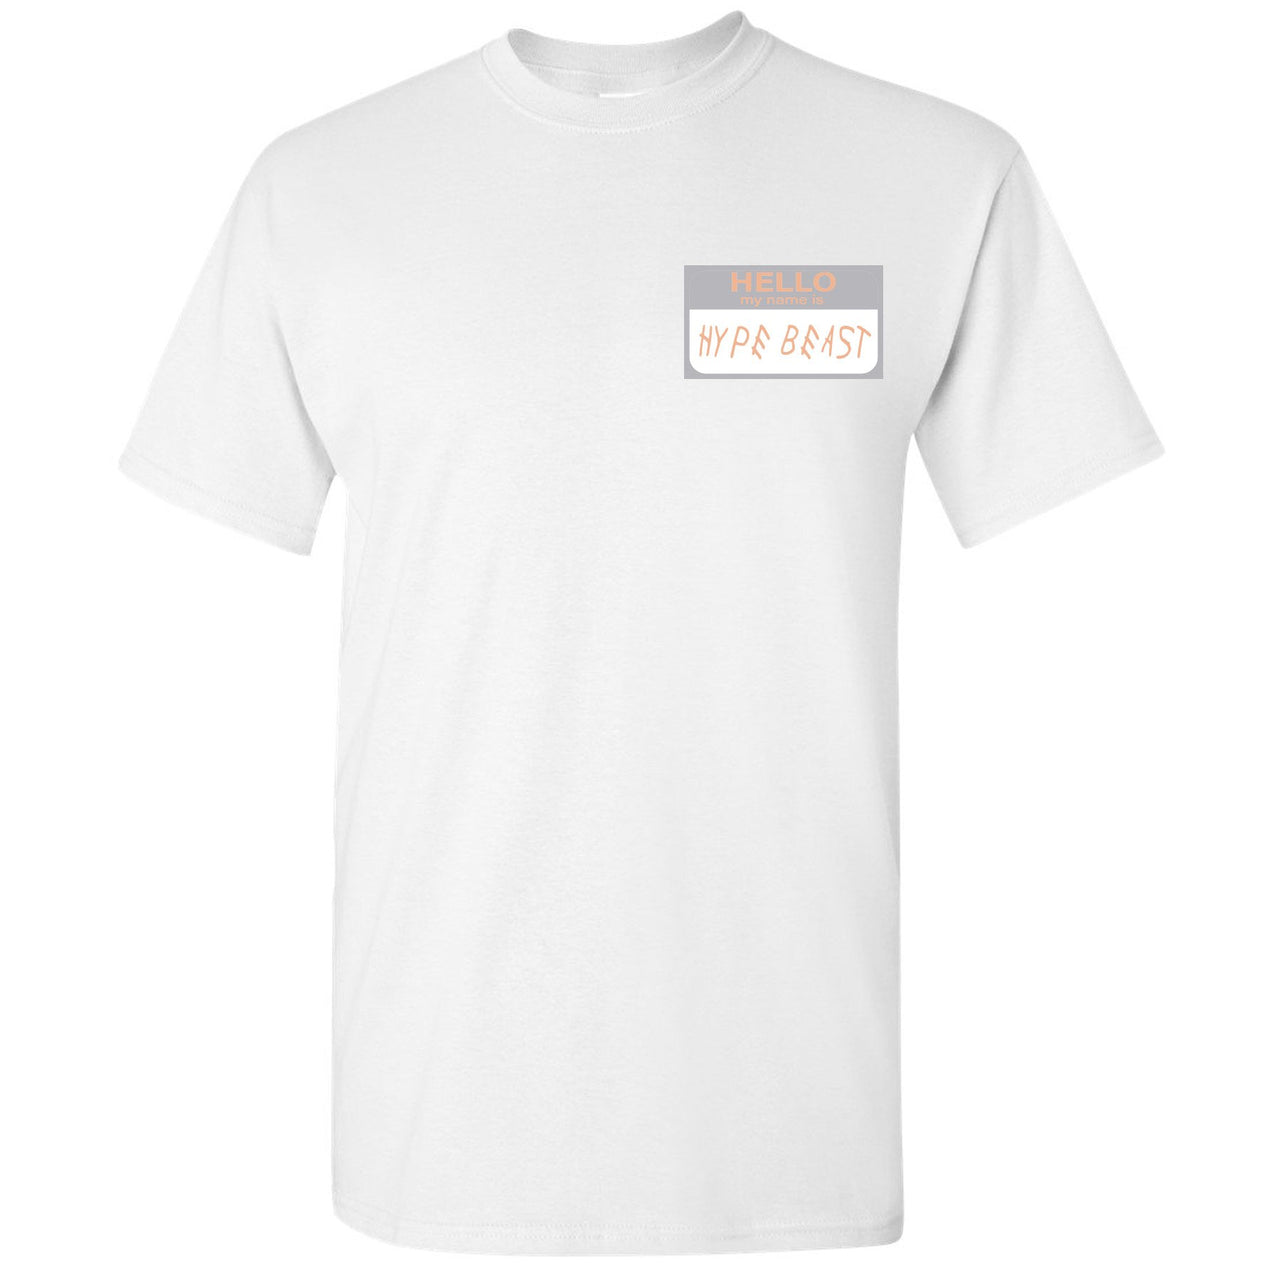 True Form v2 350s T Shirt | Hello My Name Is Hype Beast Woe, White